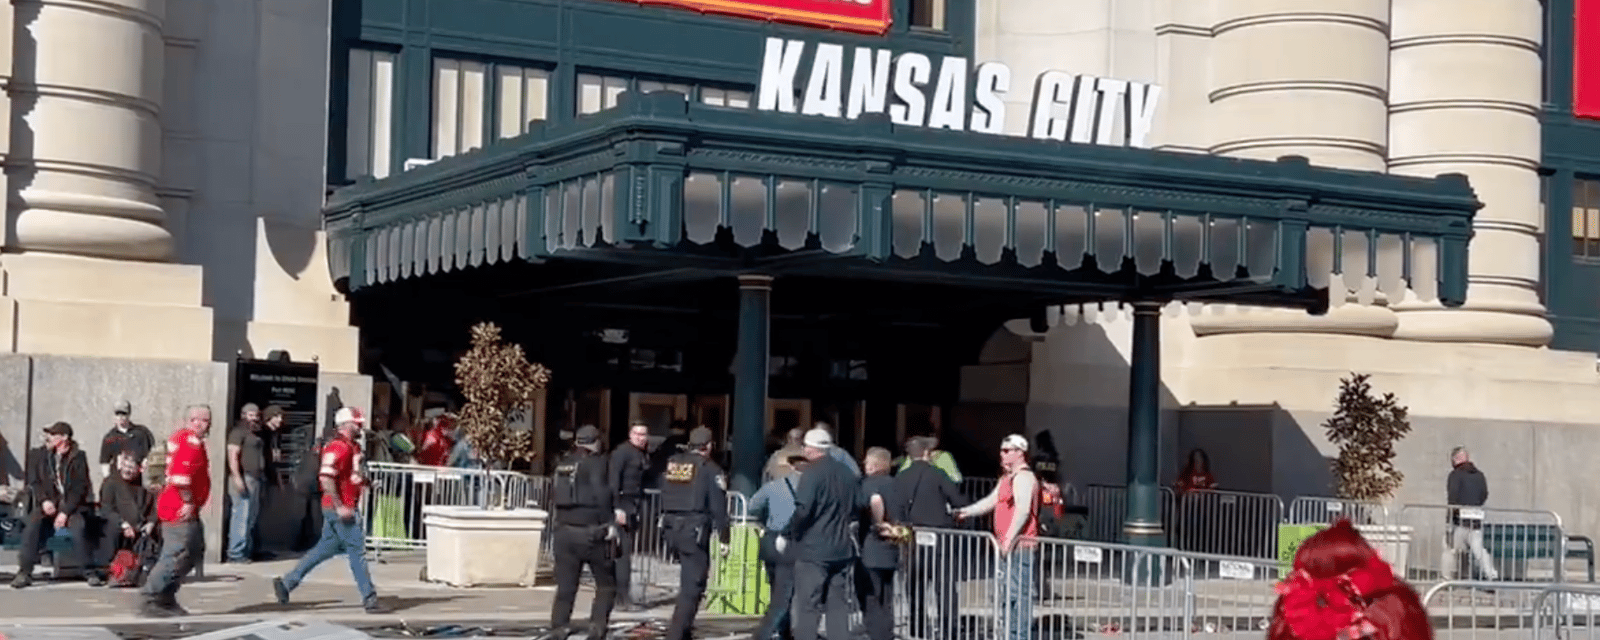 Reports of shots being fired near Chiefs Super Bowl parade 